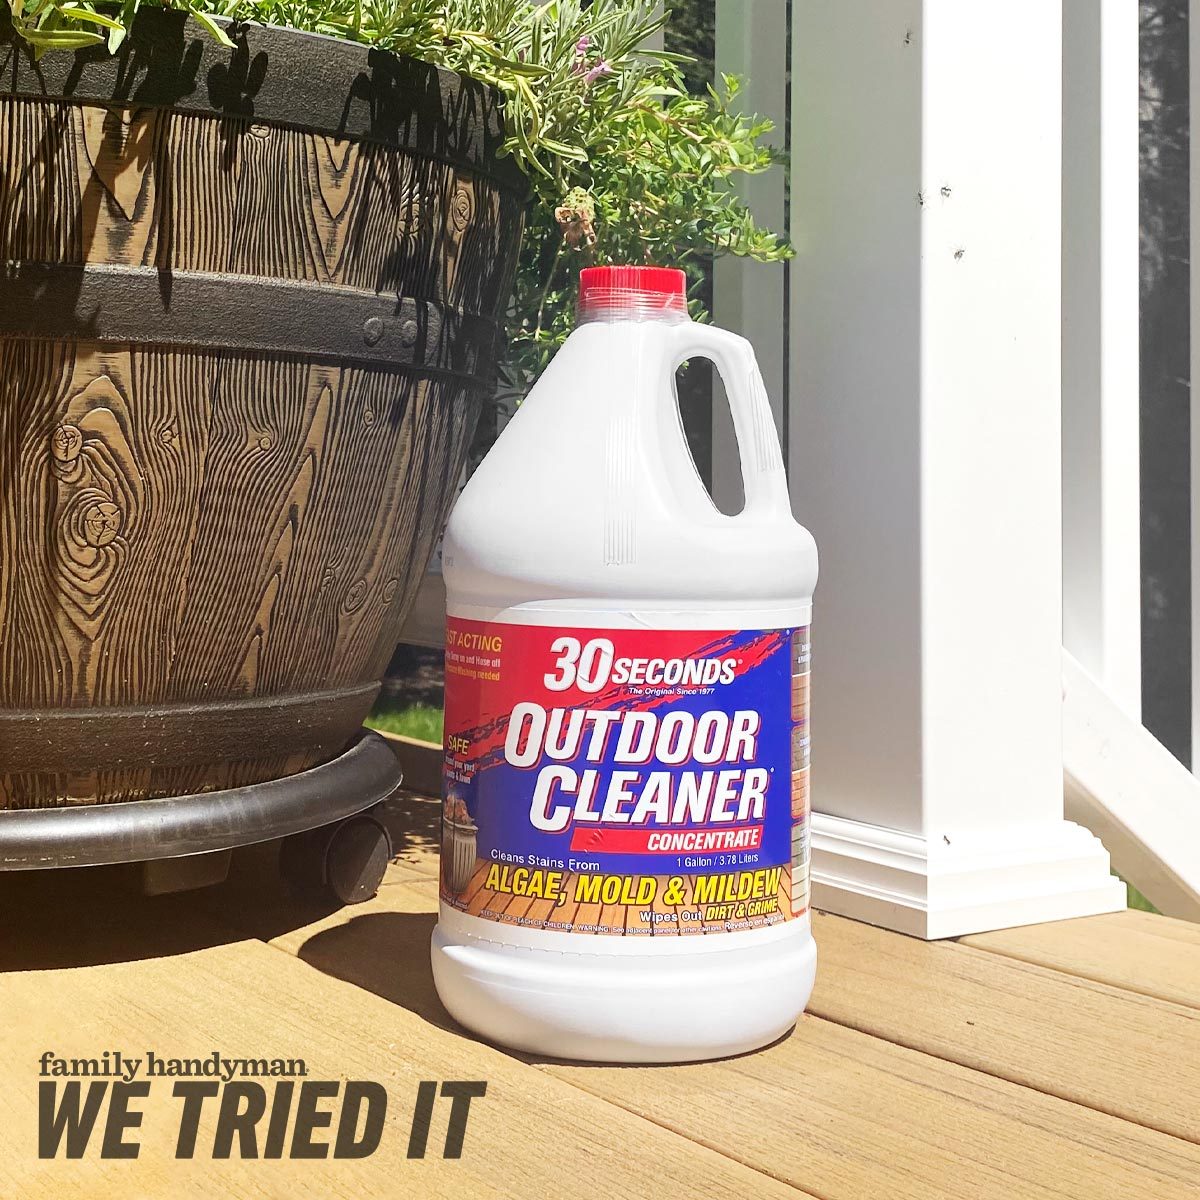 30 Seconds Outdoor Cleaner Review: Our Tested and Trusted Verdict